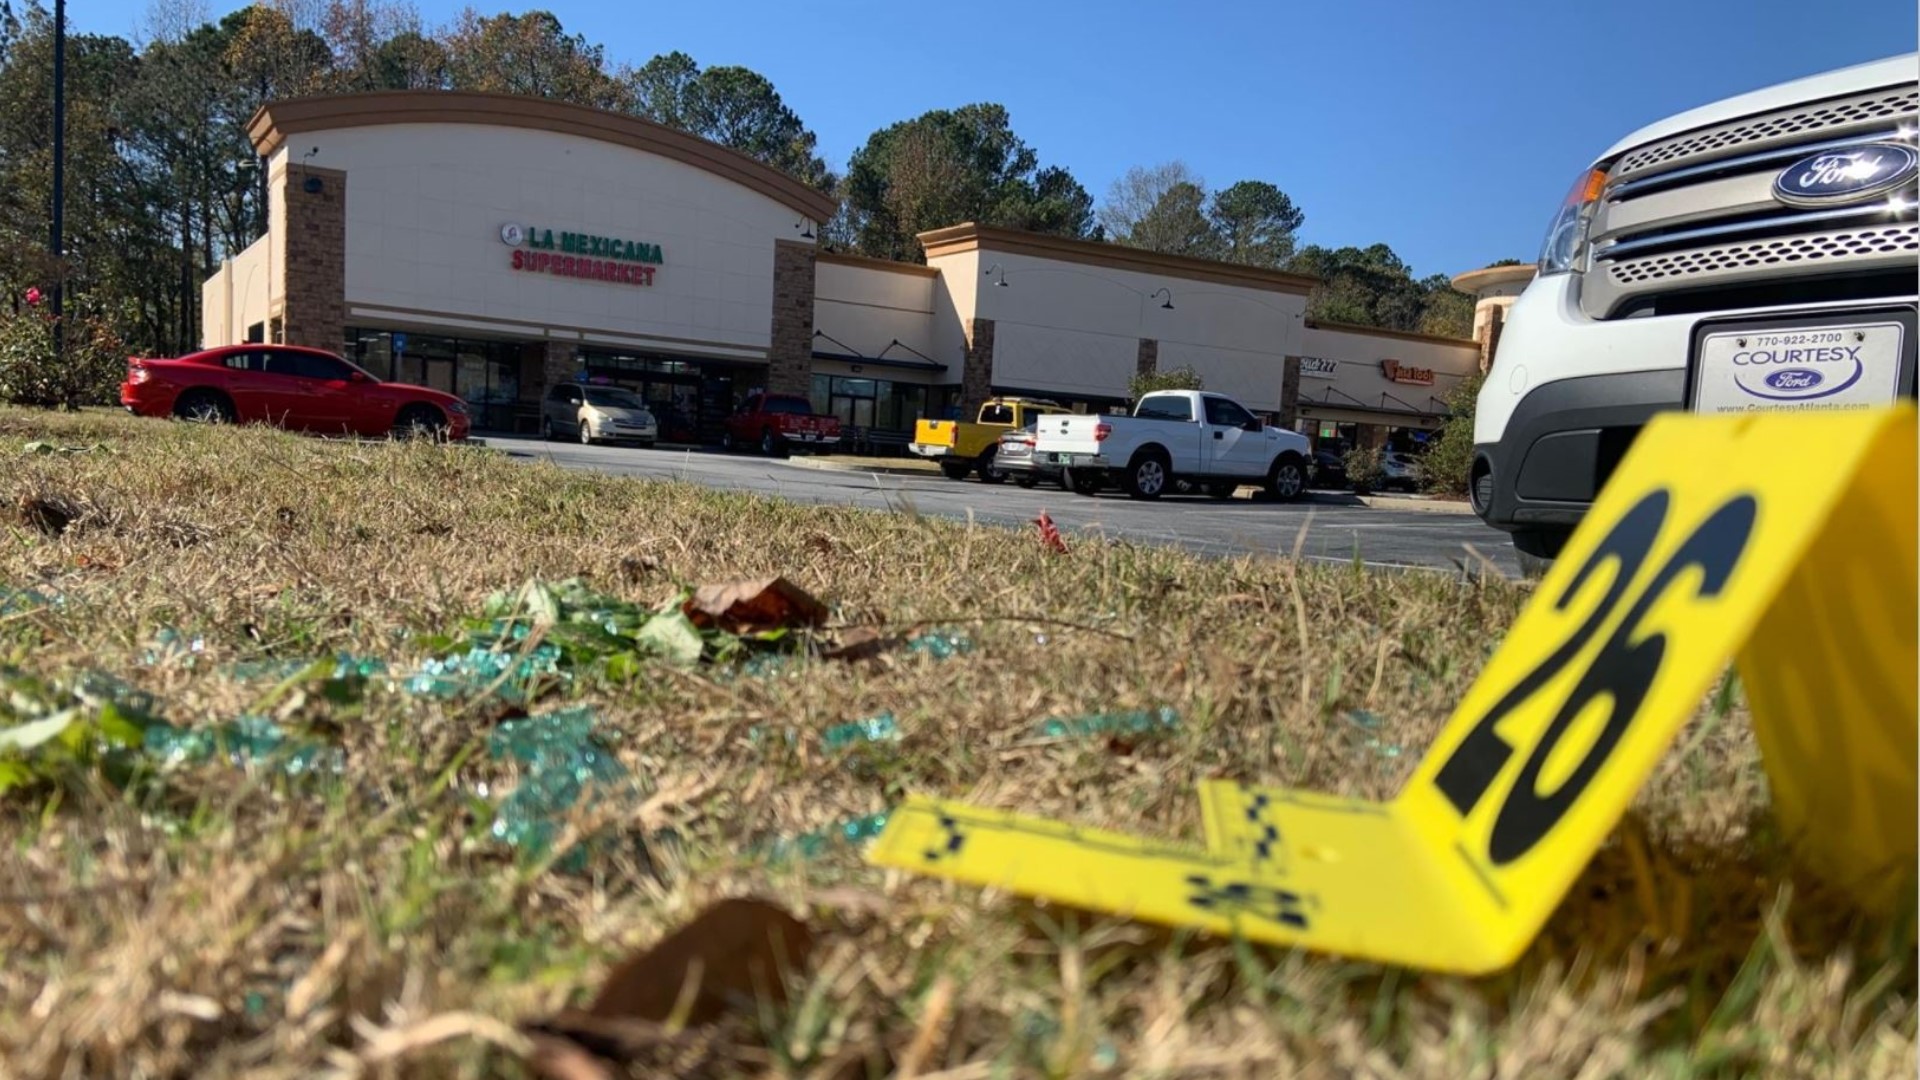 A teen boy is dead and a 17-year-old girl is in the hospital after a shooting outside a Gwinnett County supermarket Wednesday night, police said.